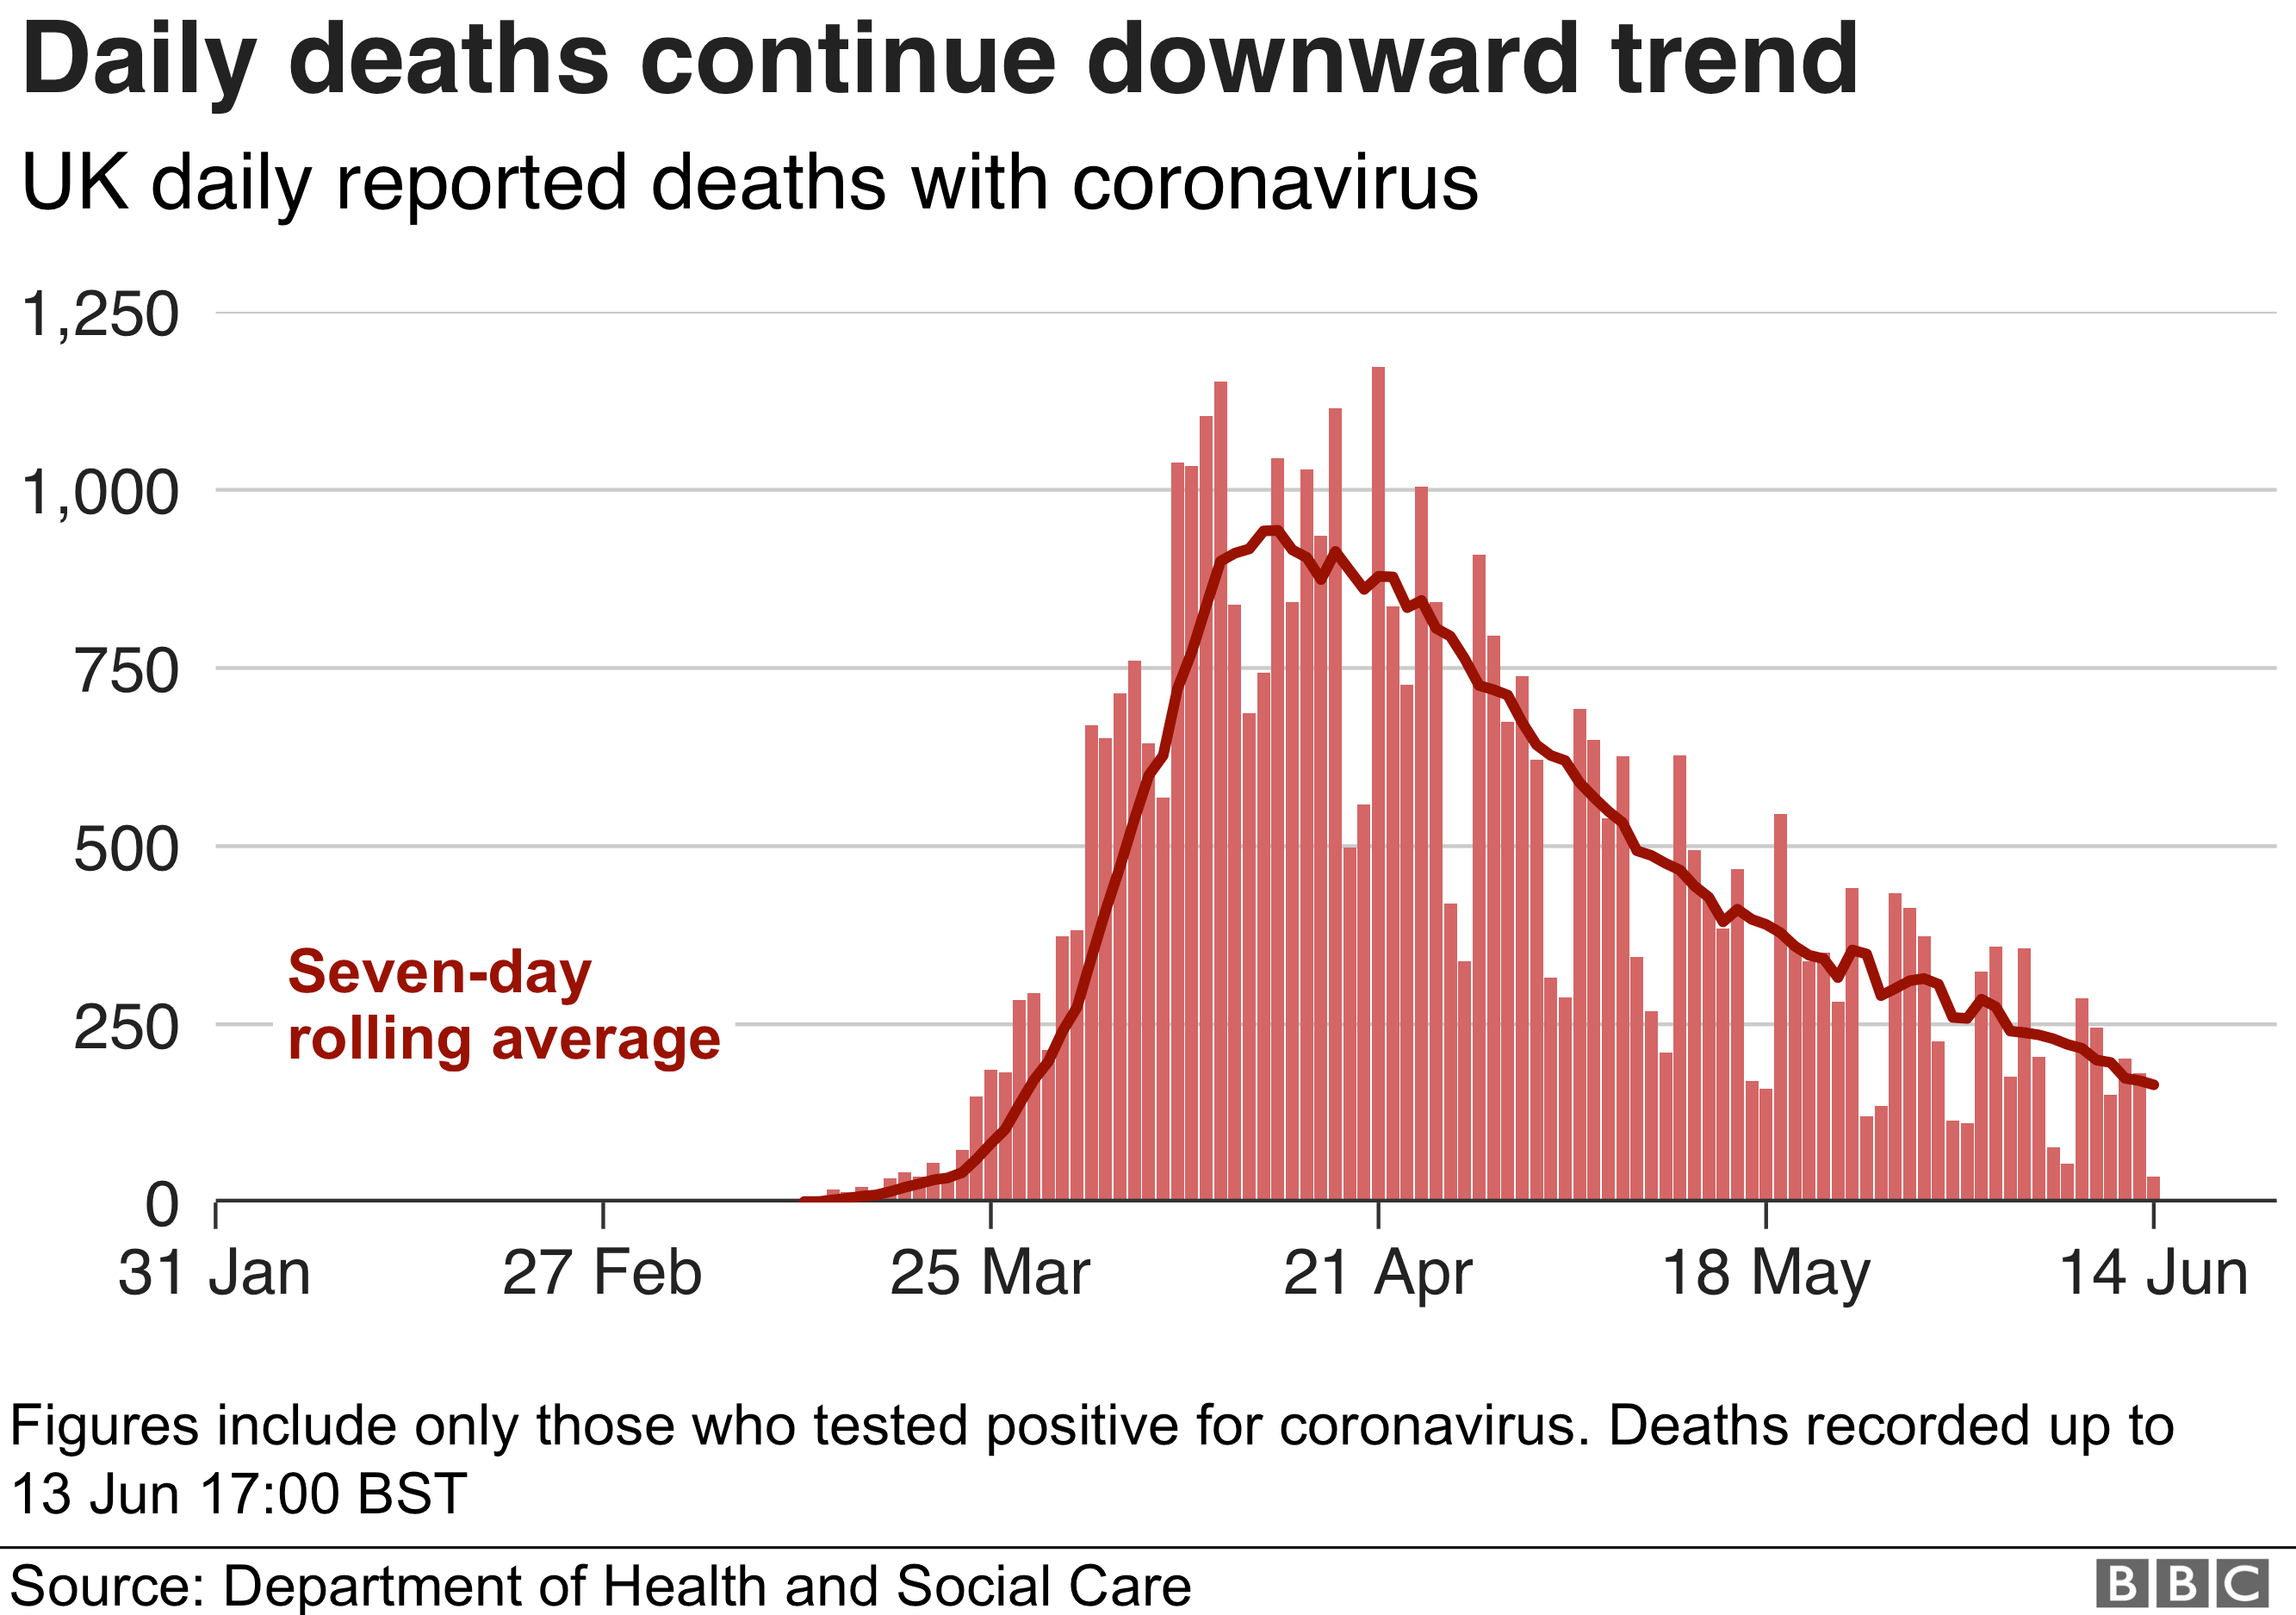 Chart showing daily deaths and seven-day rolling average